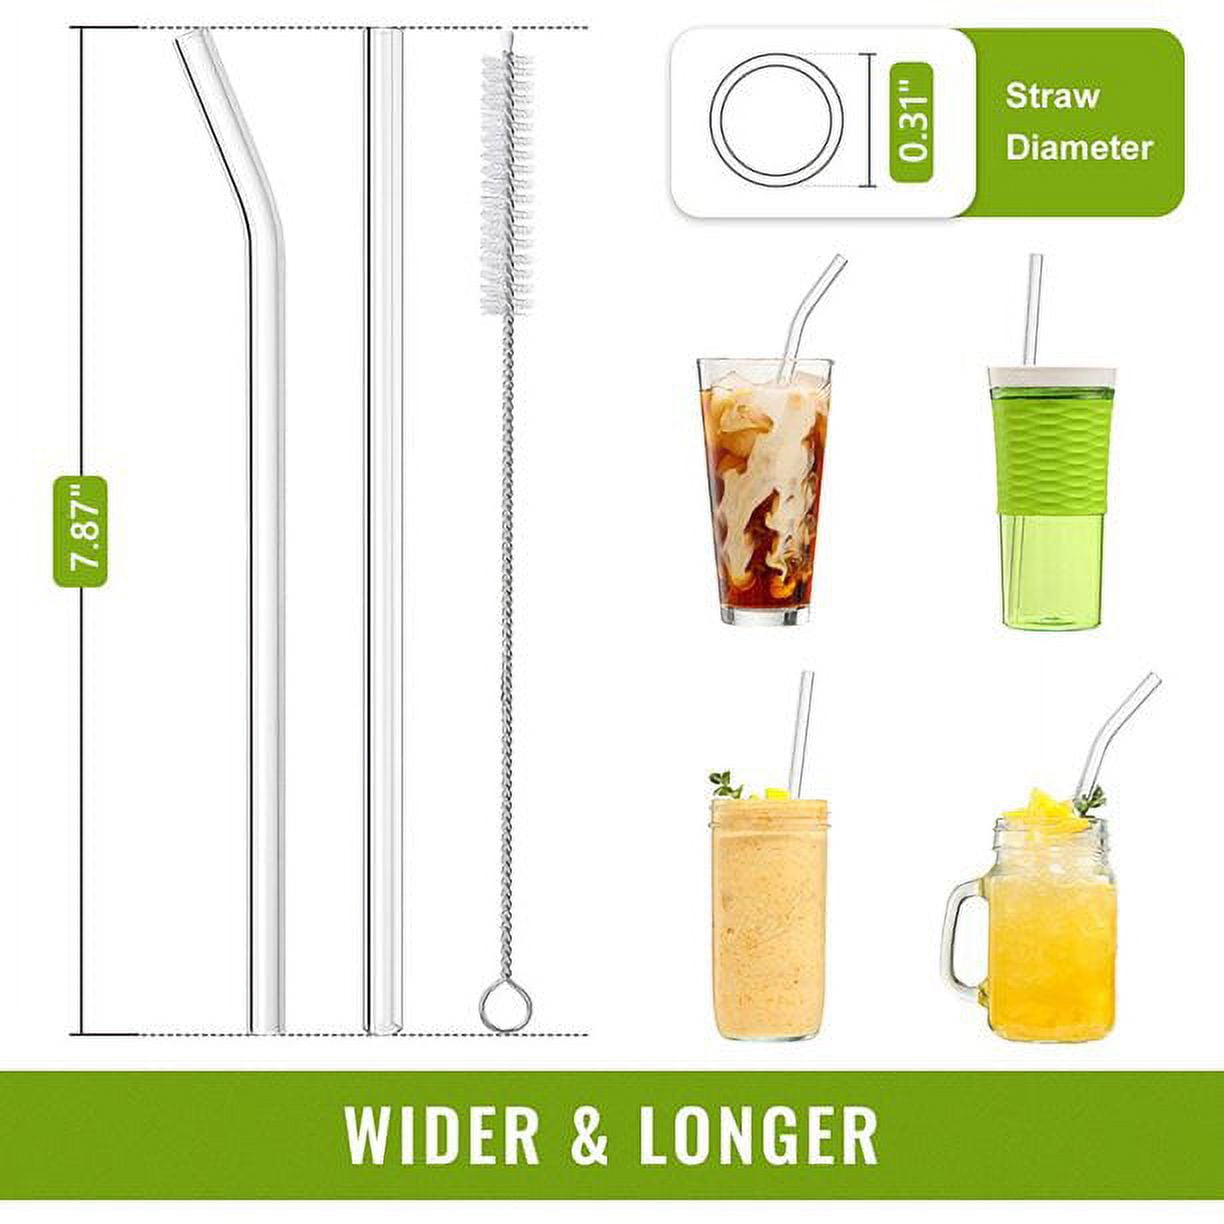 ALINK Reusable Glass Straws, 12-Pack Clear Glass Drinking Straw for  Smoothies, Cocktail, Tea, Milkshakes with 2 Cleaning Brush - 8.5 inch x 10  mm